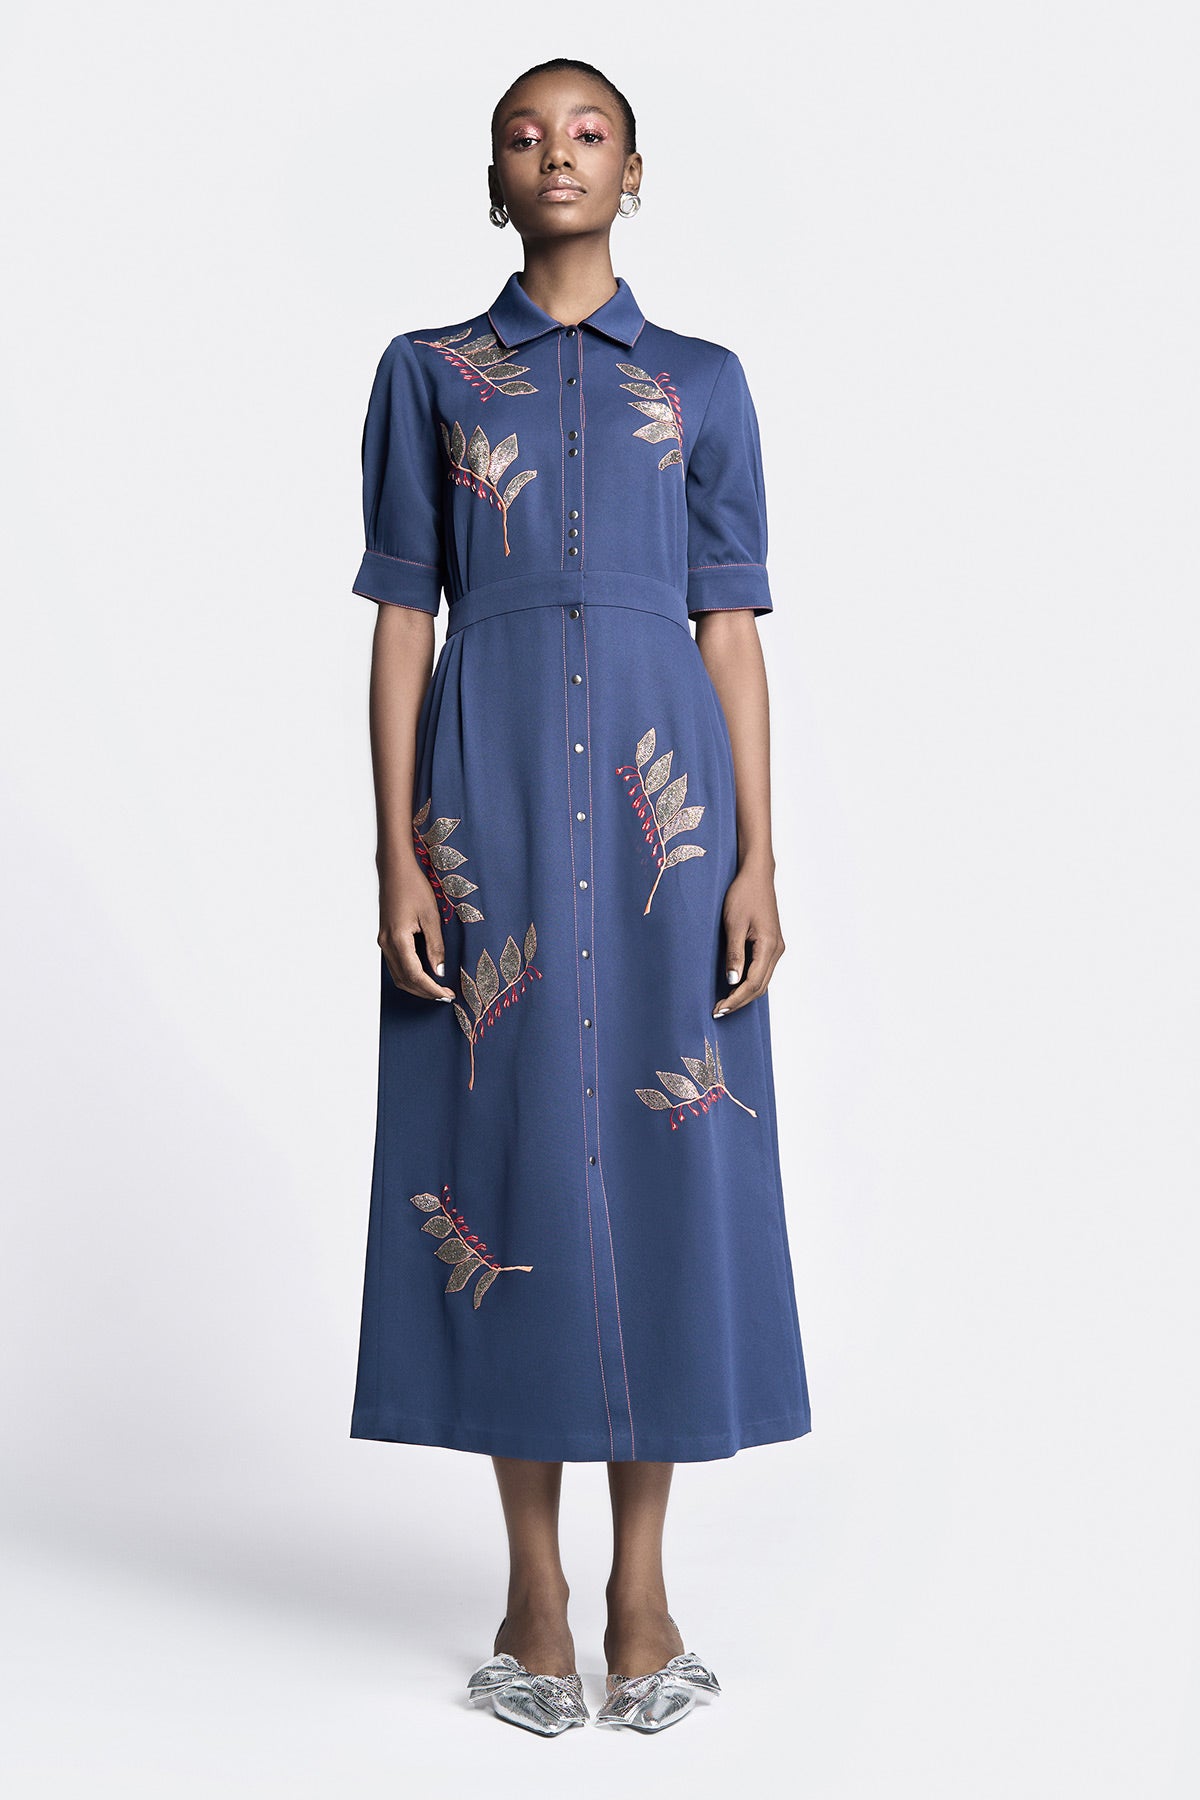 Autumn Leaves Side Pleated Front Open Dress